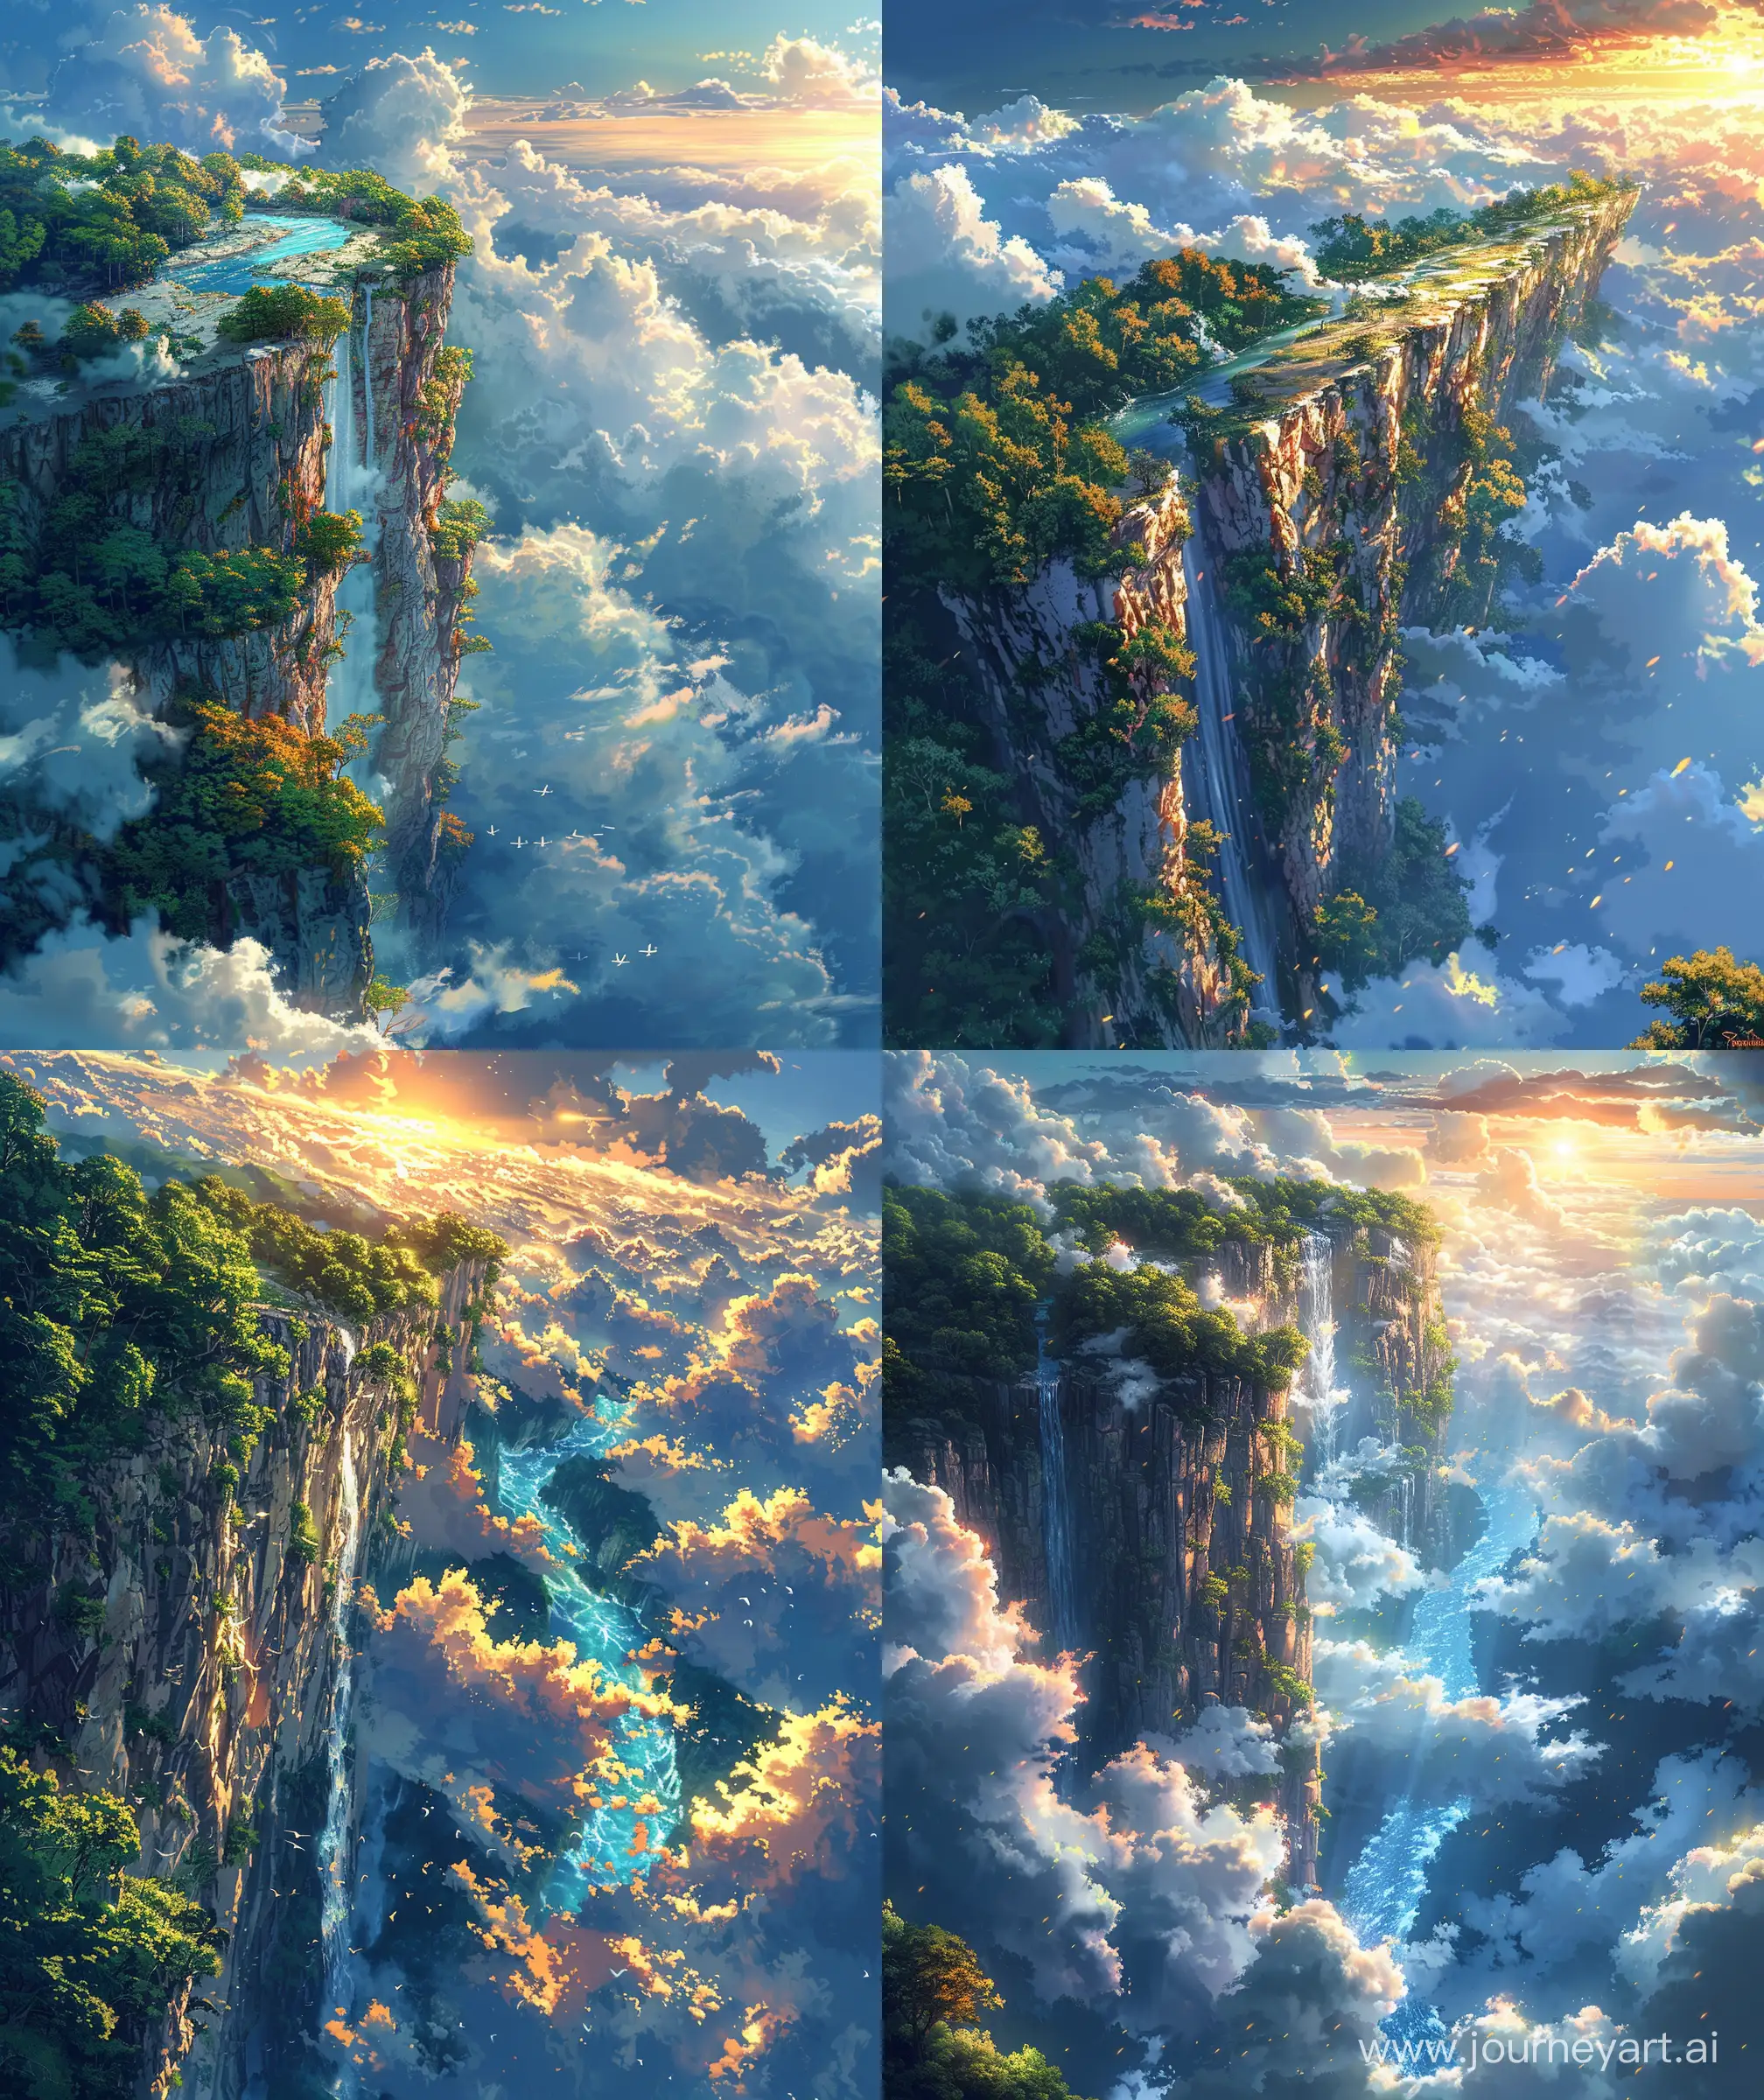 Anime-Style-Cliff-Edge-Above-the-Clouds-with-River-Flowing-GhibliInspired-Scenery